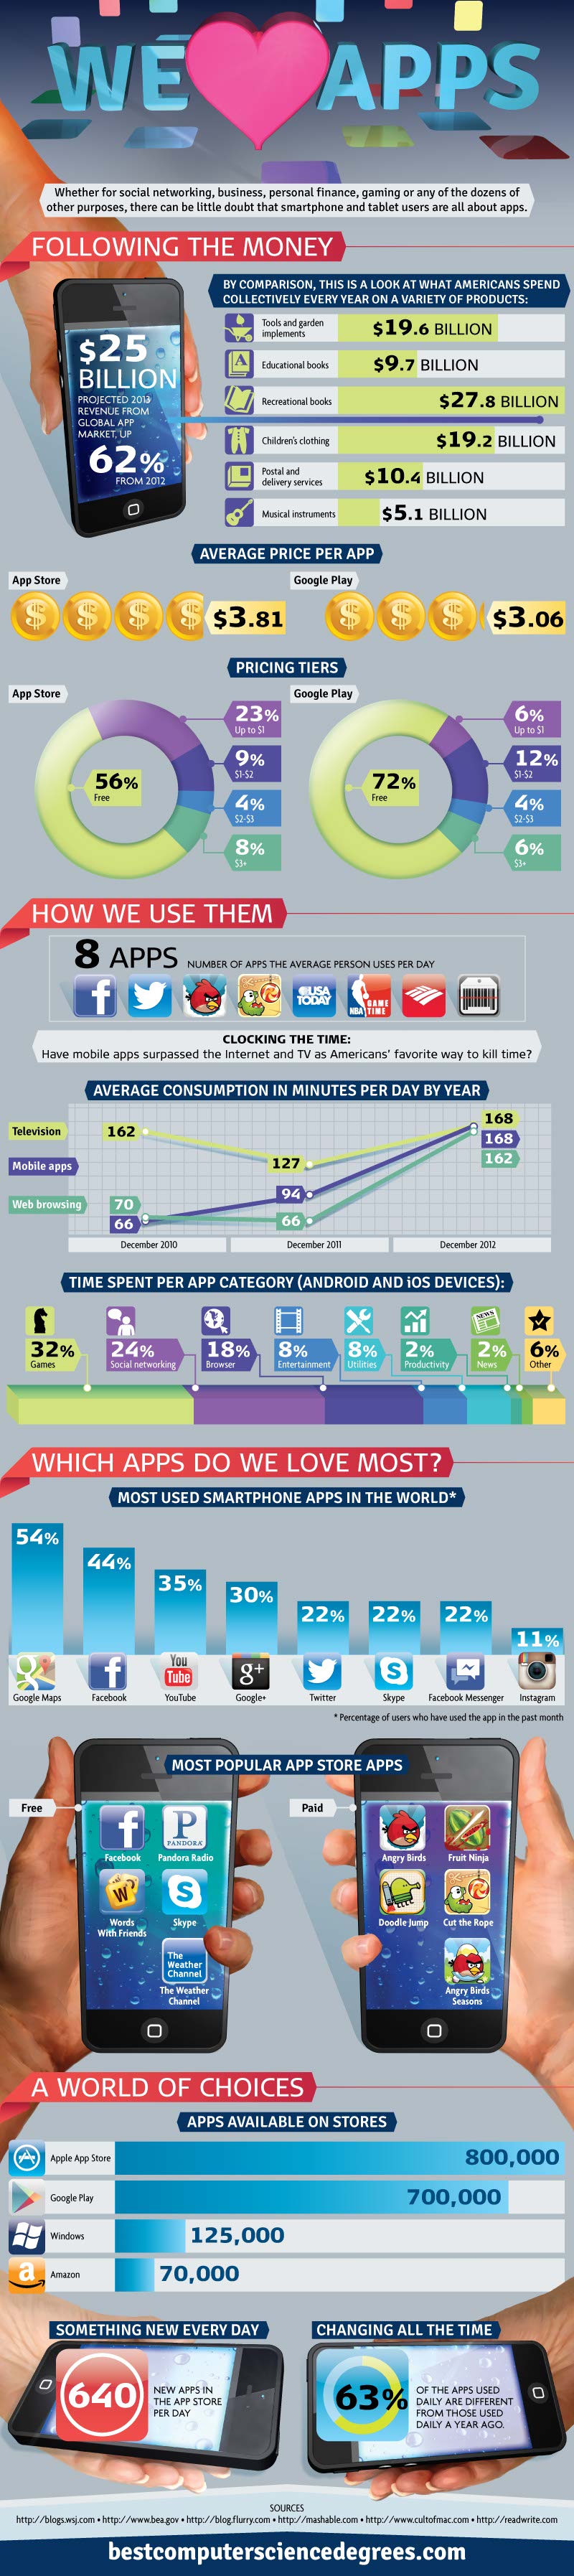 Apps dominion-Infographic